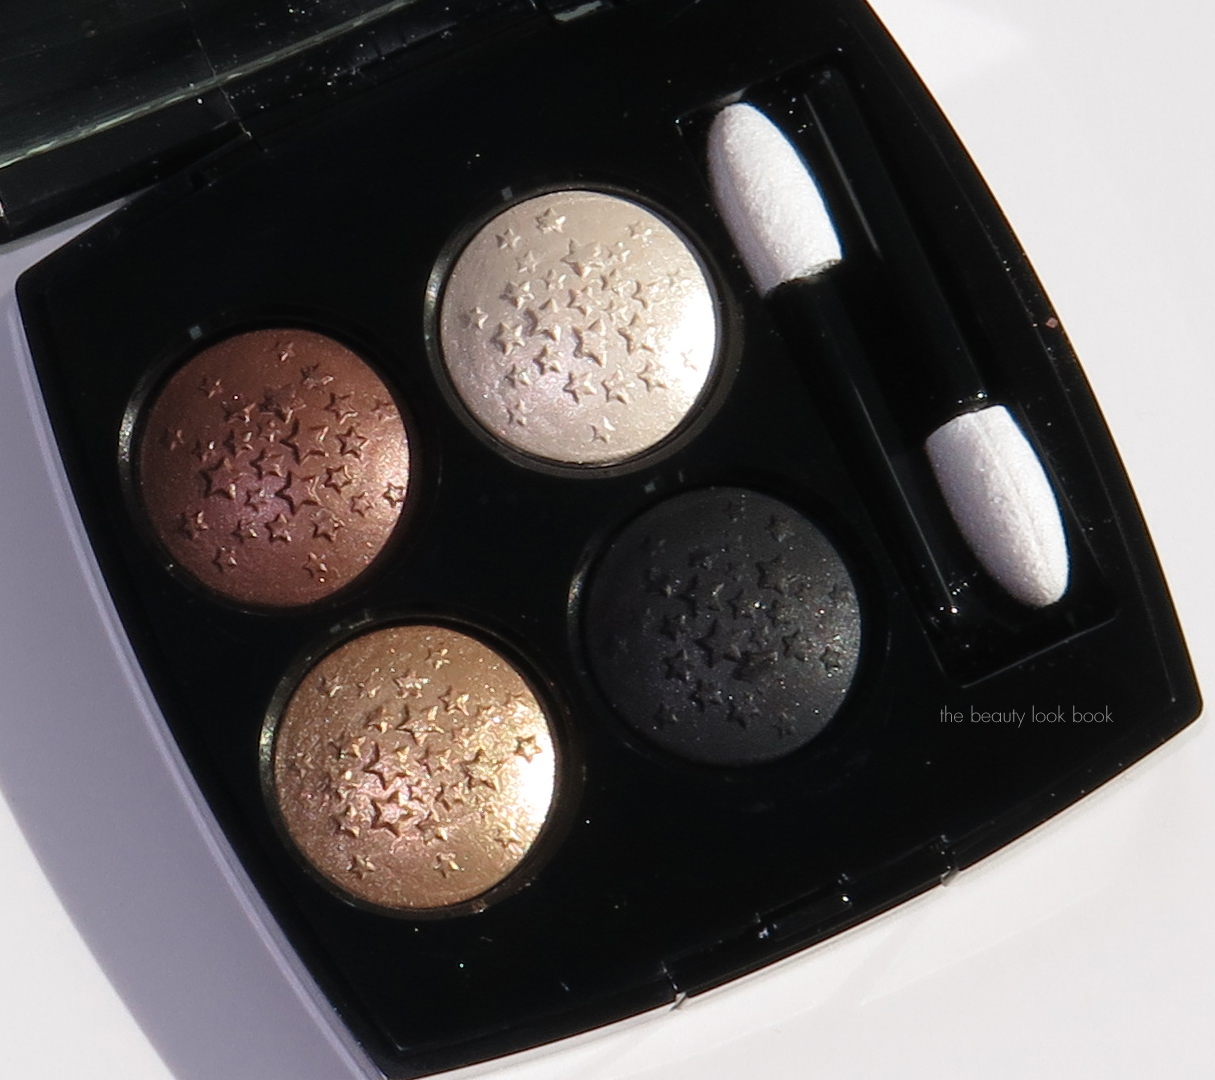 Chanel Tisse Vendome (204) Les 4 Ombres Multi-Effect Quadra Eyeshadow  Review & Swatches